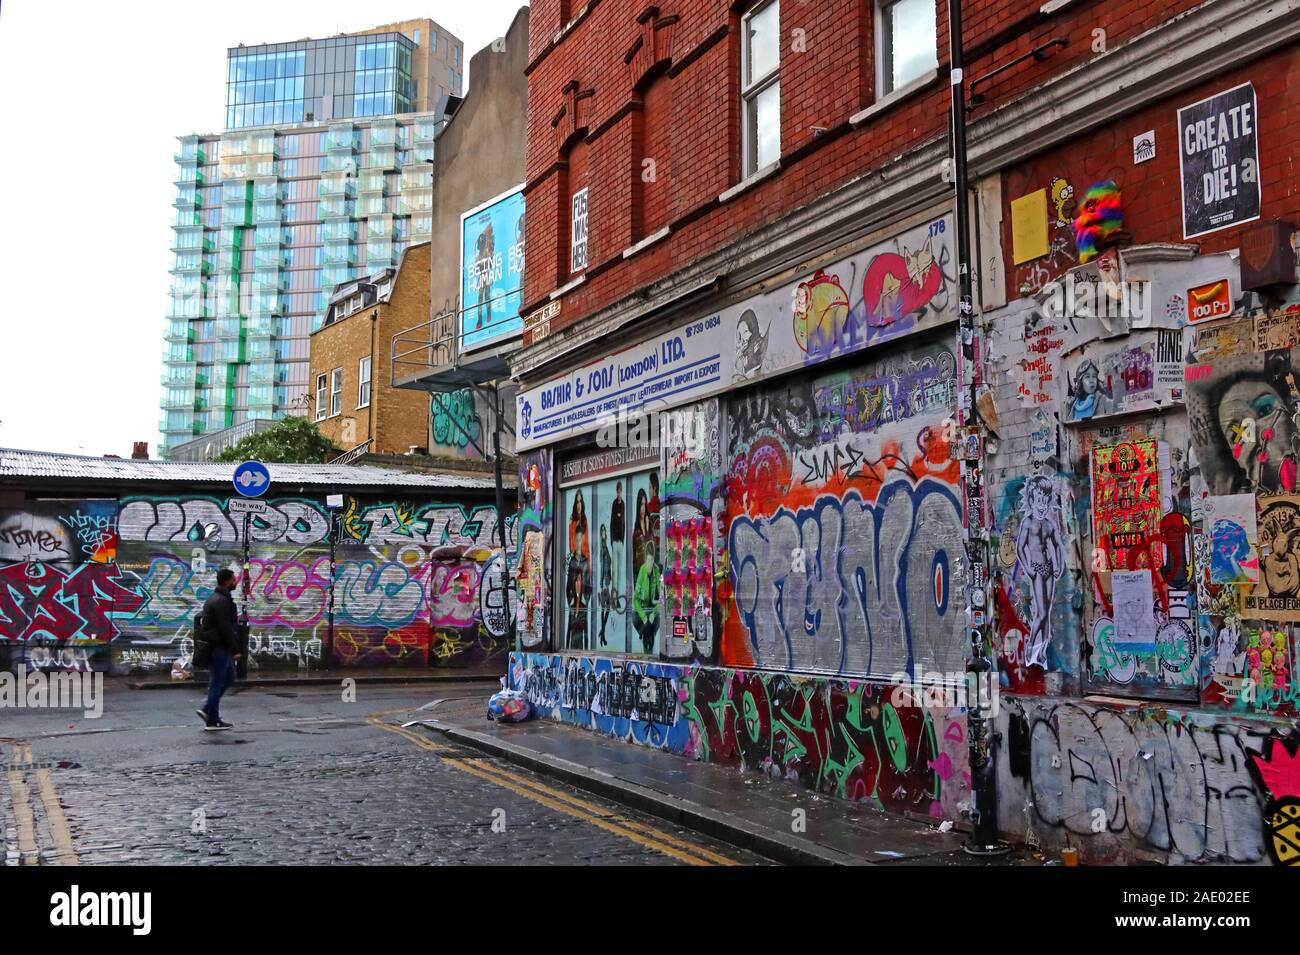 Street art at the Junction of Grimsby Street and Brick Lane,East London, England,UK Stock Photo